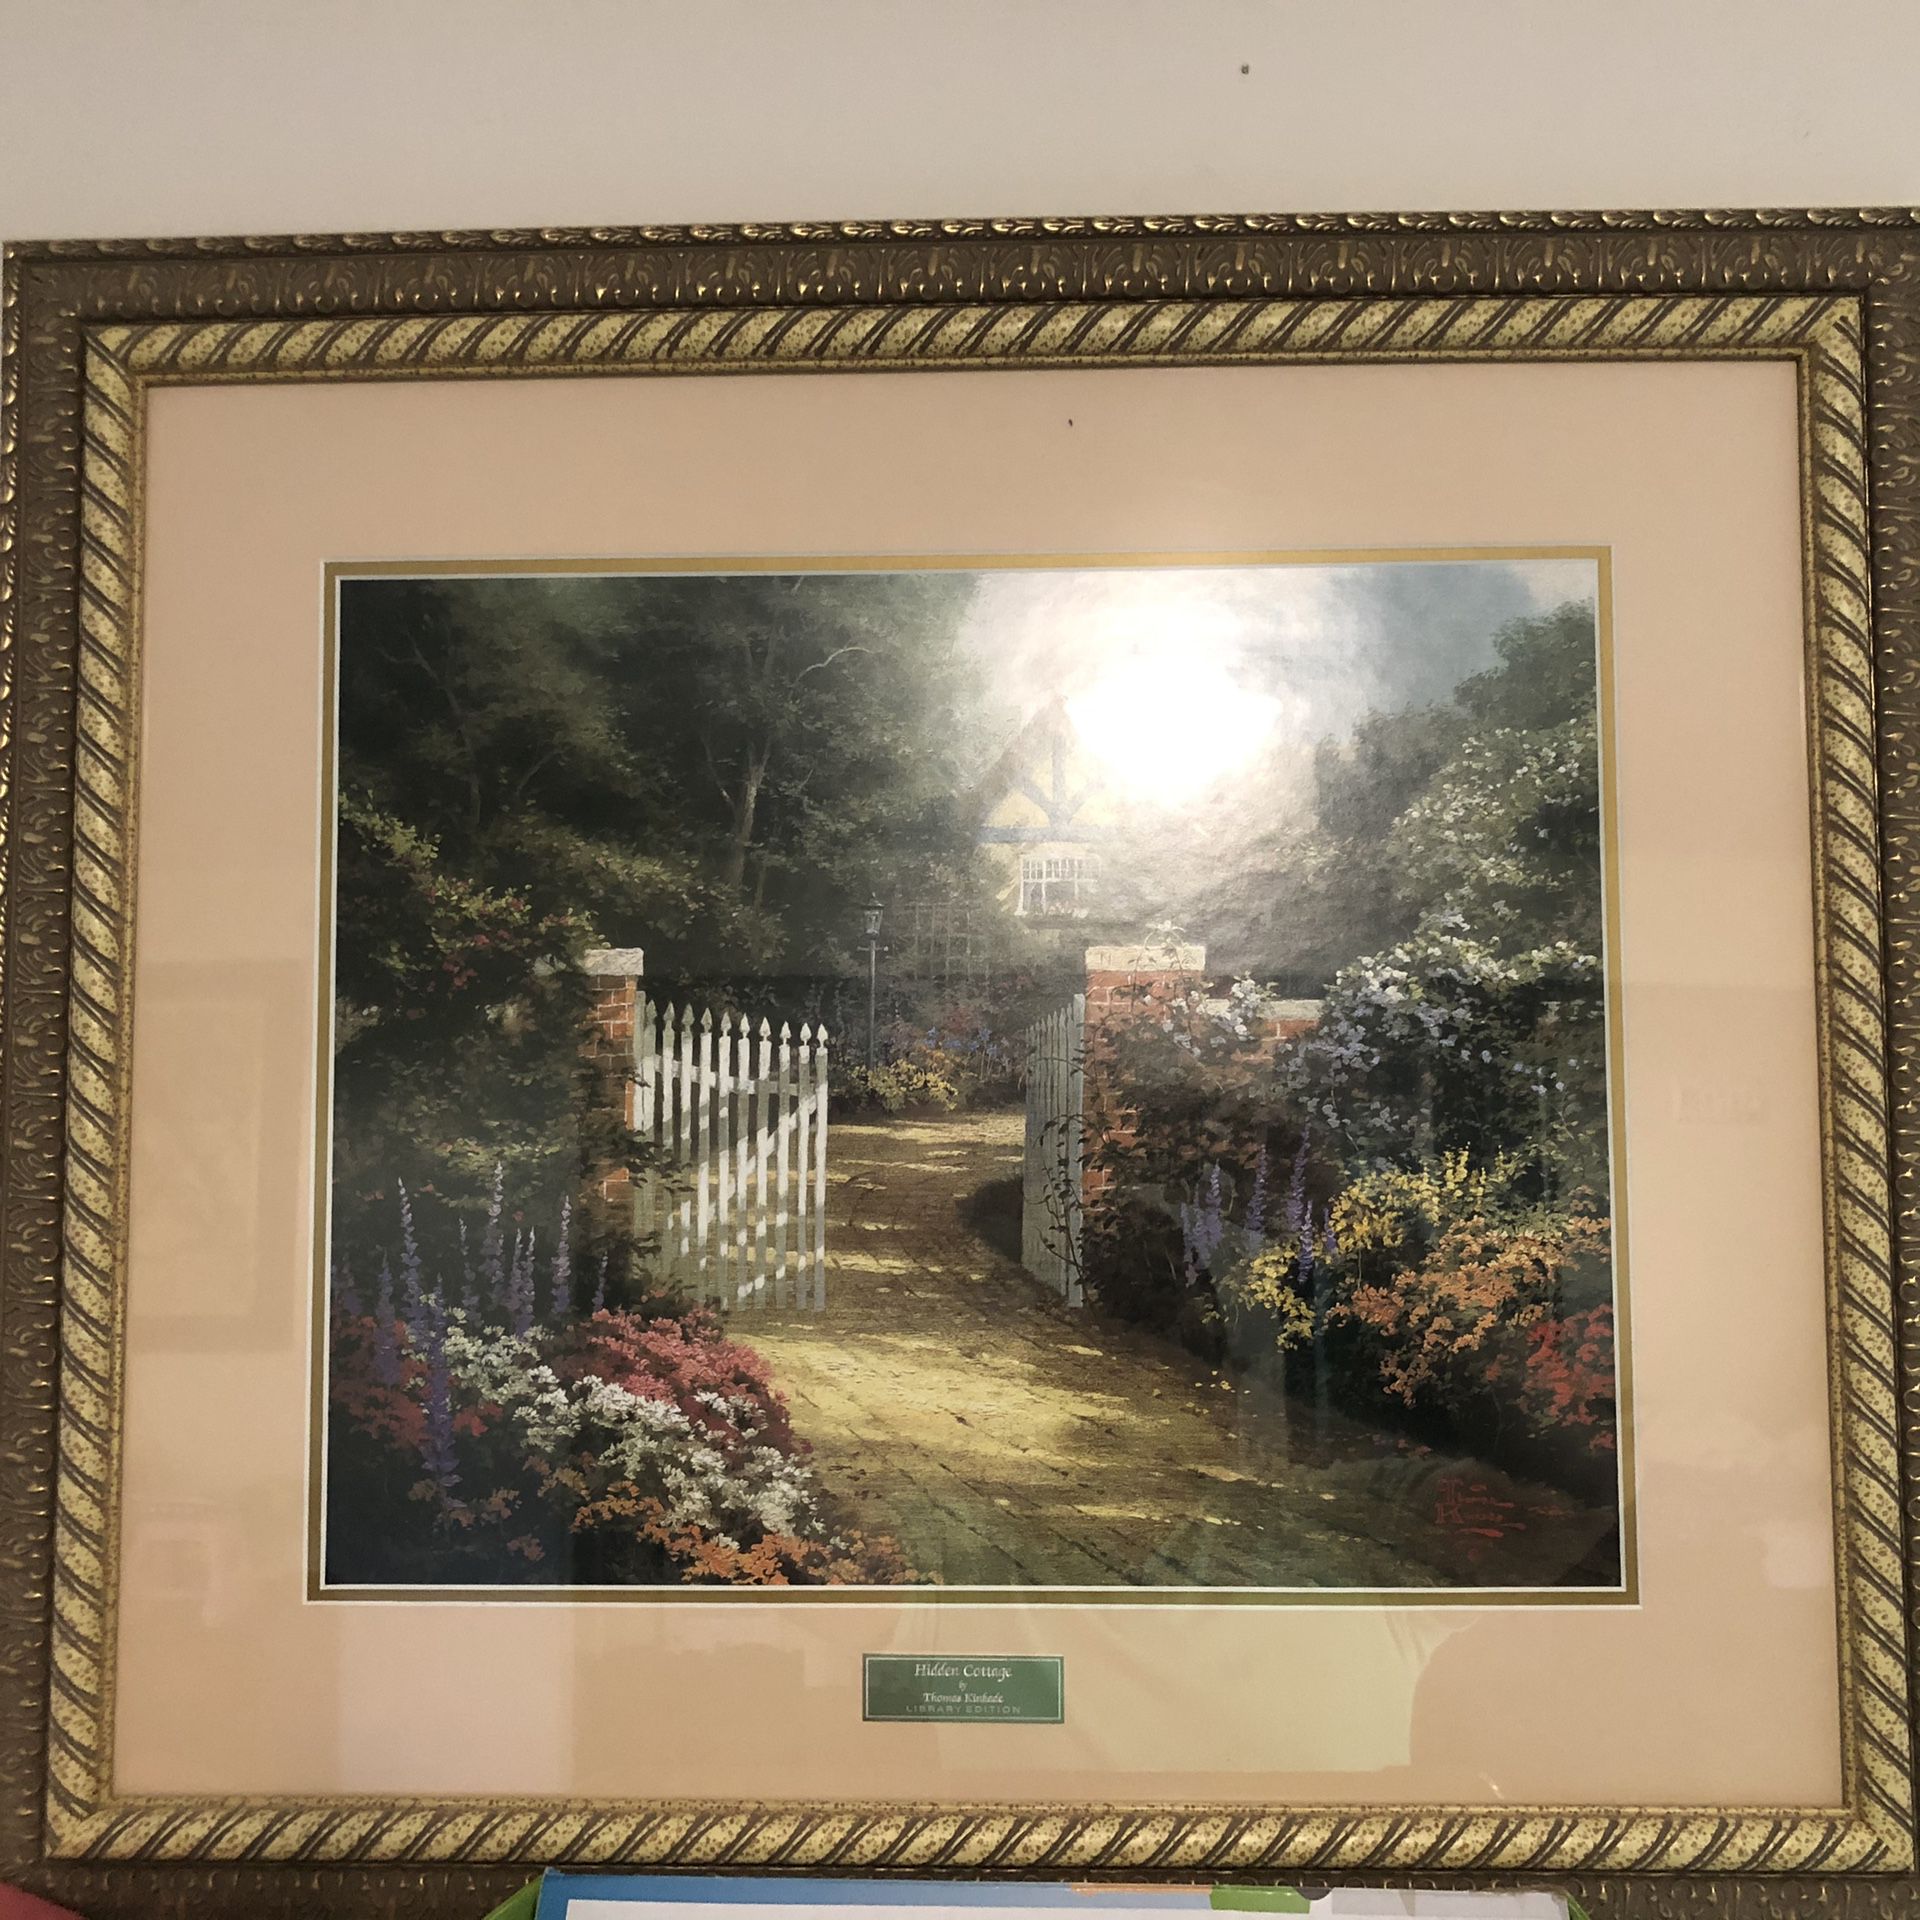 Thomas Kinkade library print, beautiful frame included in the deal